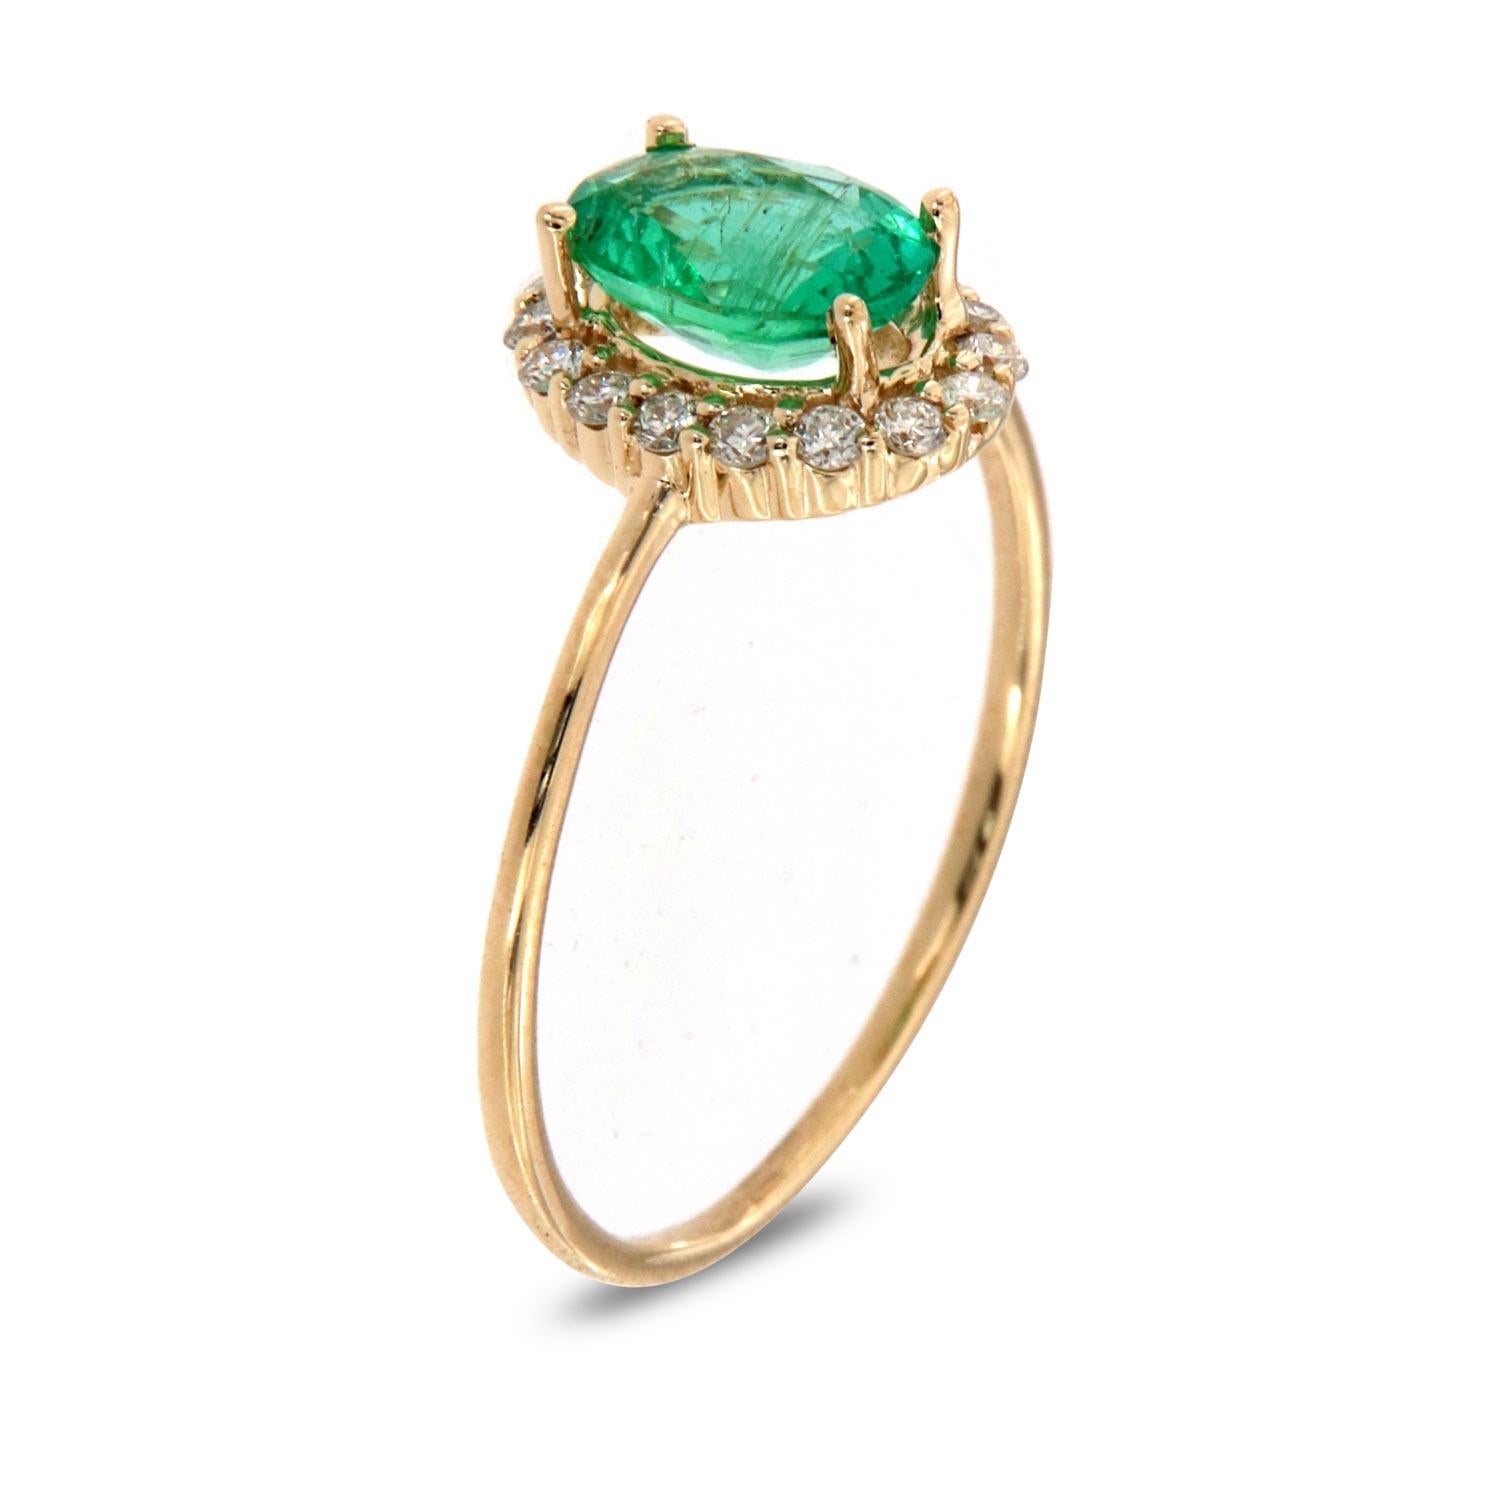 This petite Halo style ring is impressive in its vintage appeal, featuring a natural green oval emerald, accented with a halo of round brilliant diamonds. Experience the difference in person!

Product details: 

Center Gemstone Type: Emerald
Center